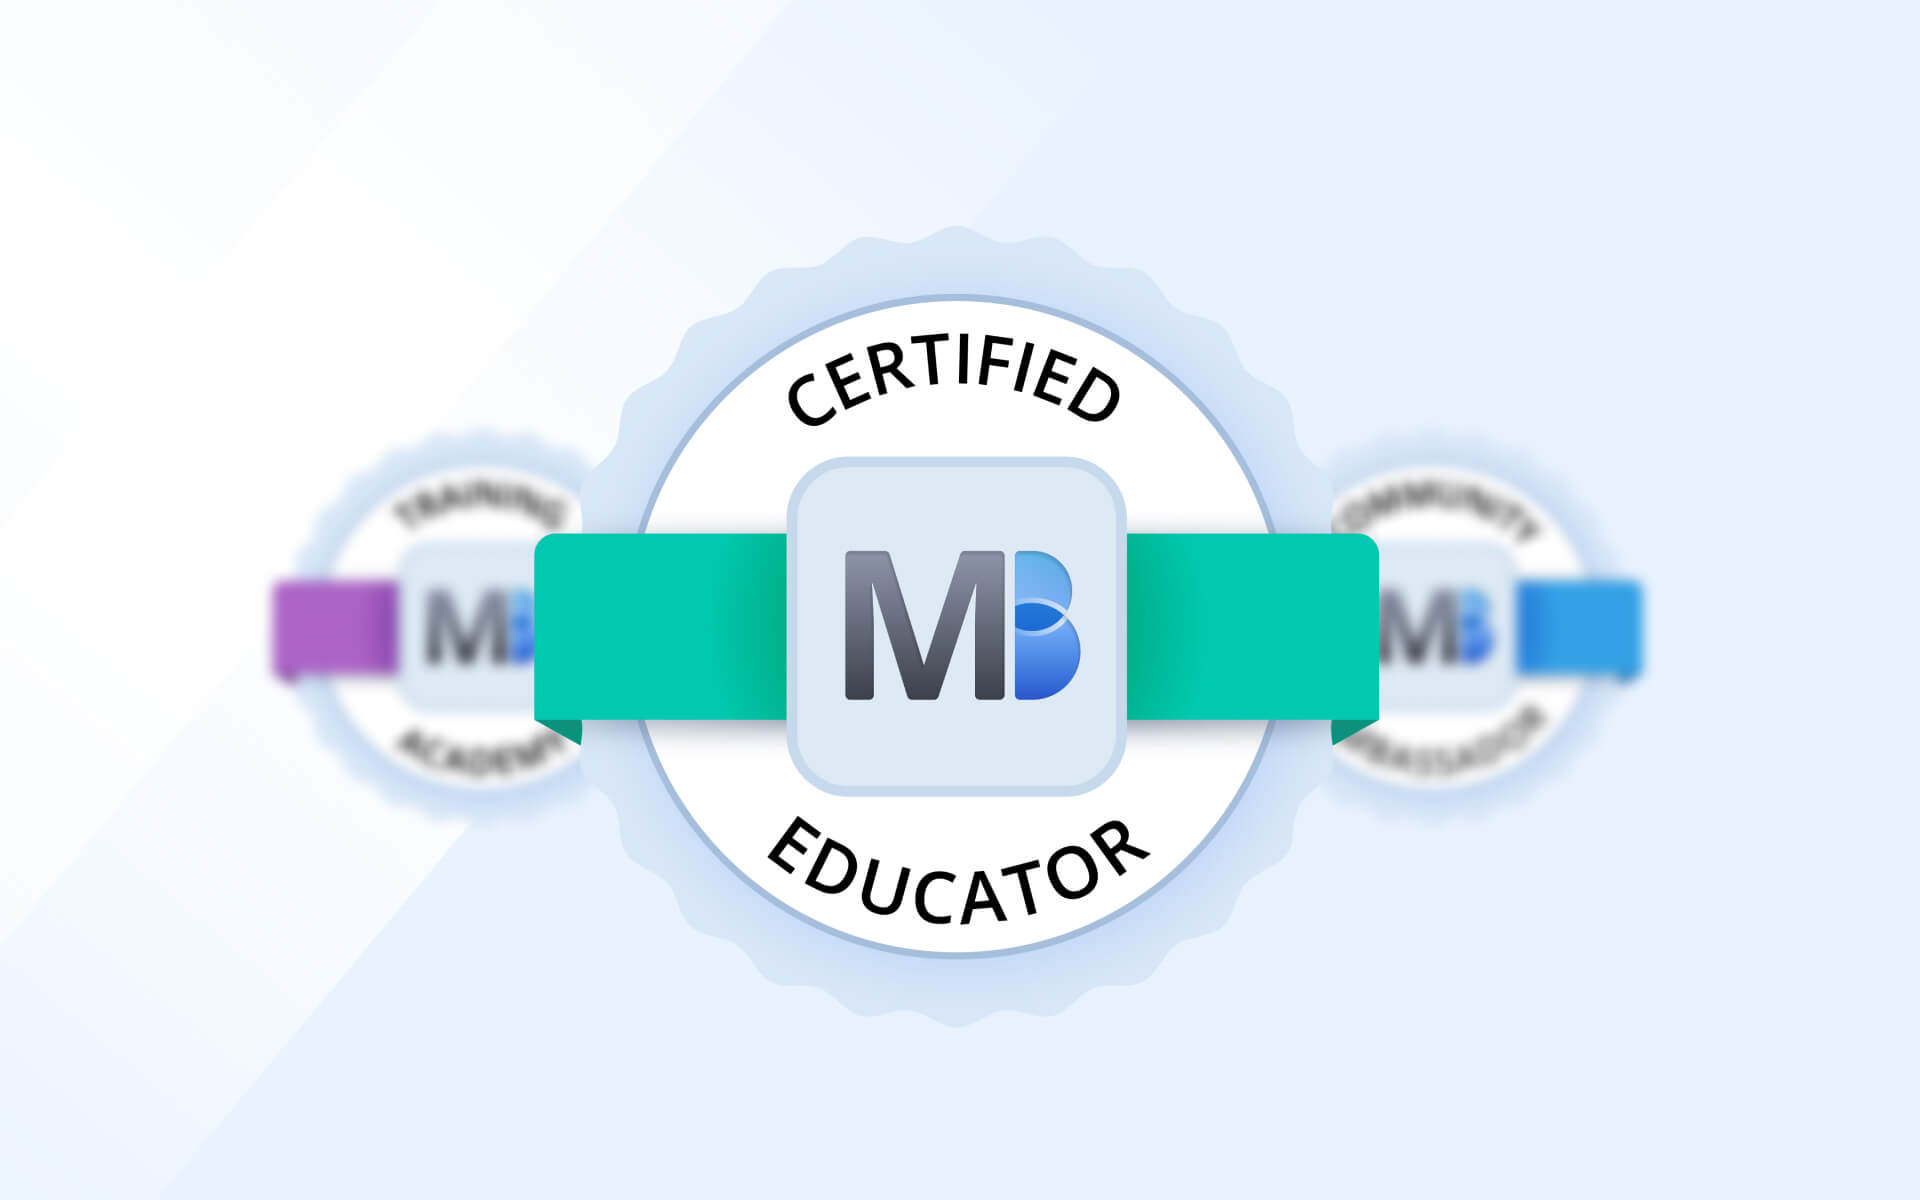 ManageBac Certified Educator Programme: Now Offering 6 Courses